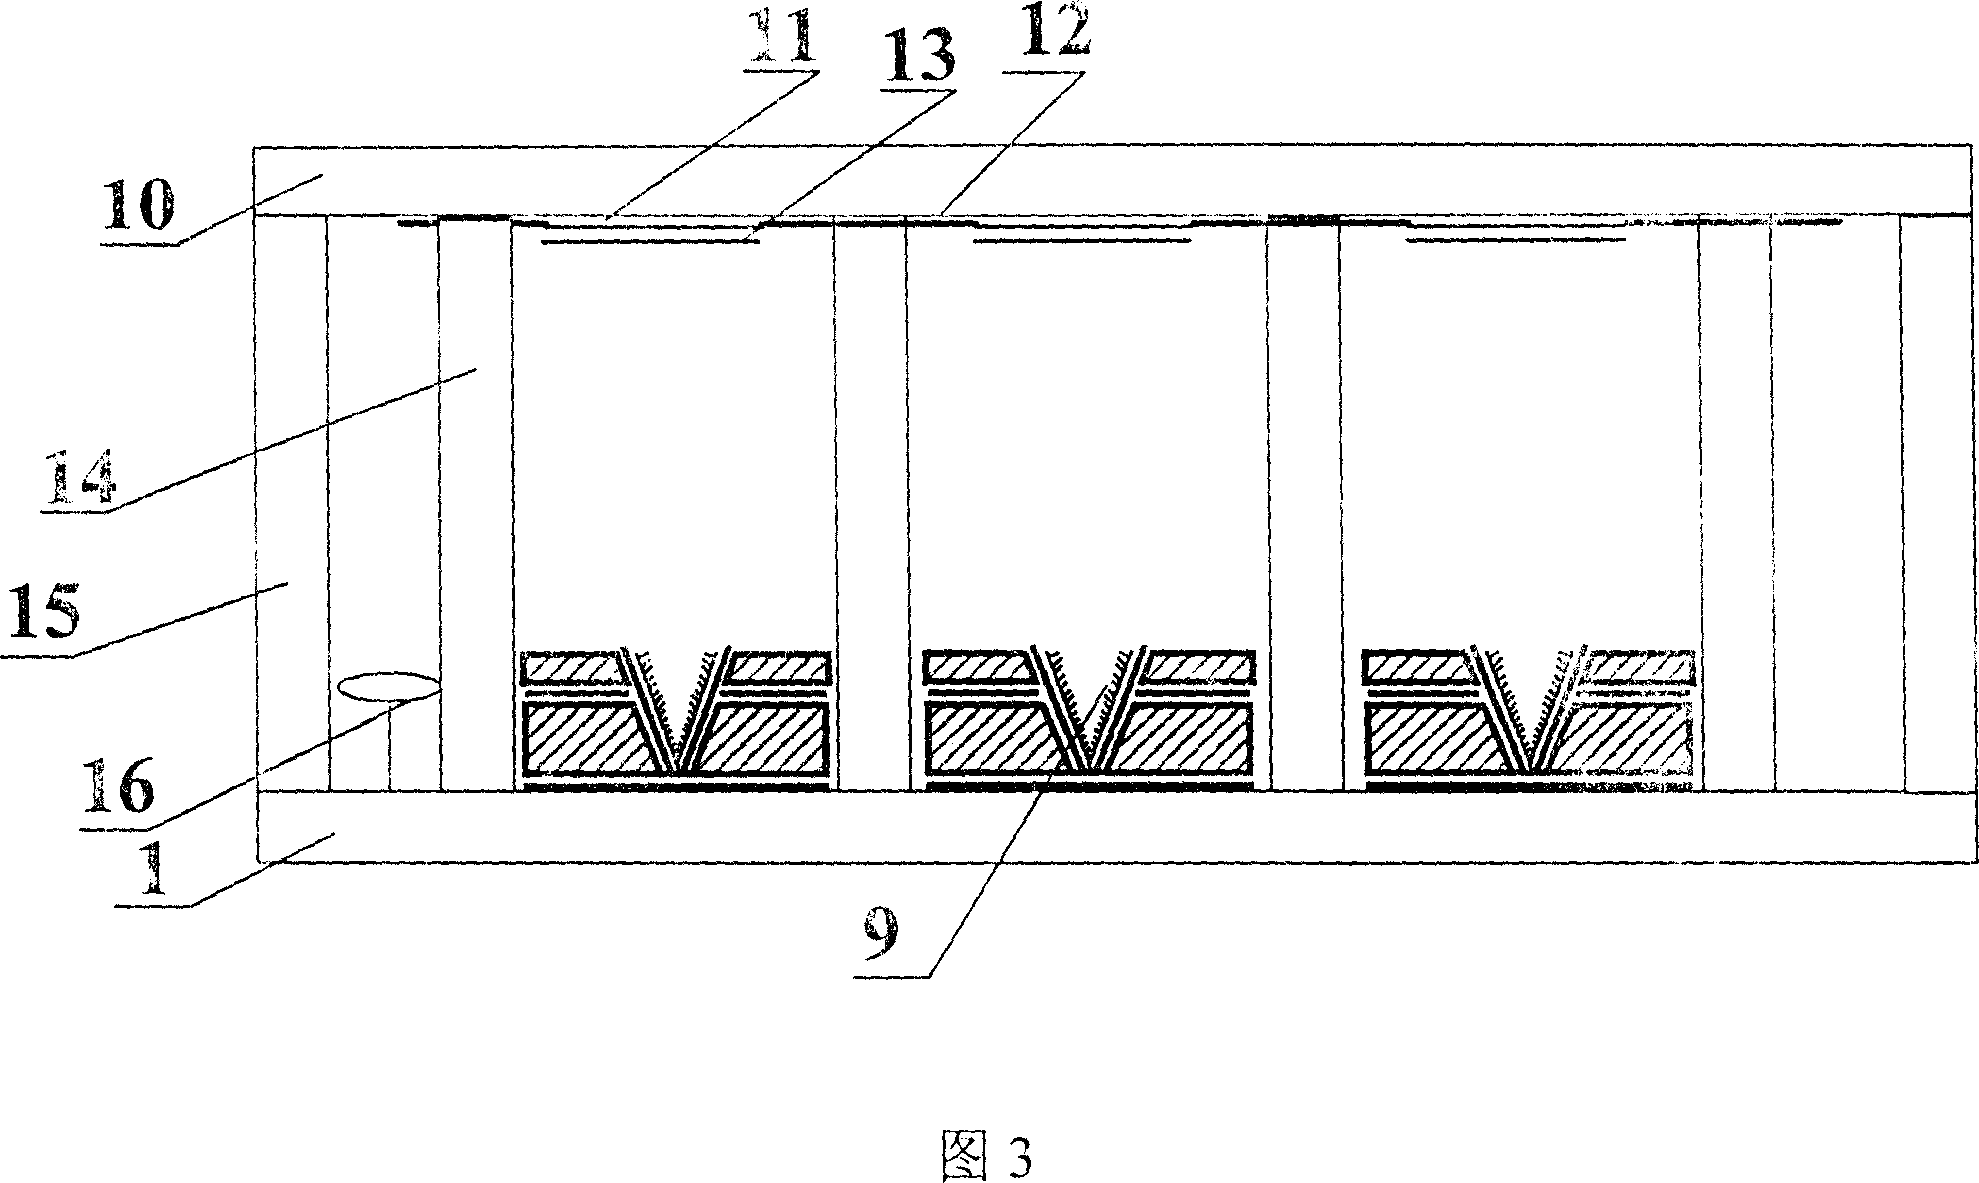 Flat board display of bevel cathode side-grid controlled structure and mfg. process